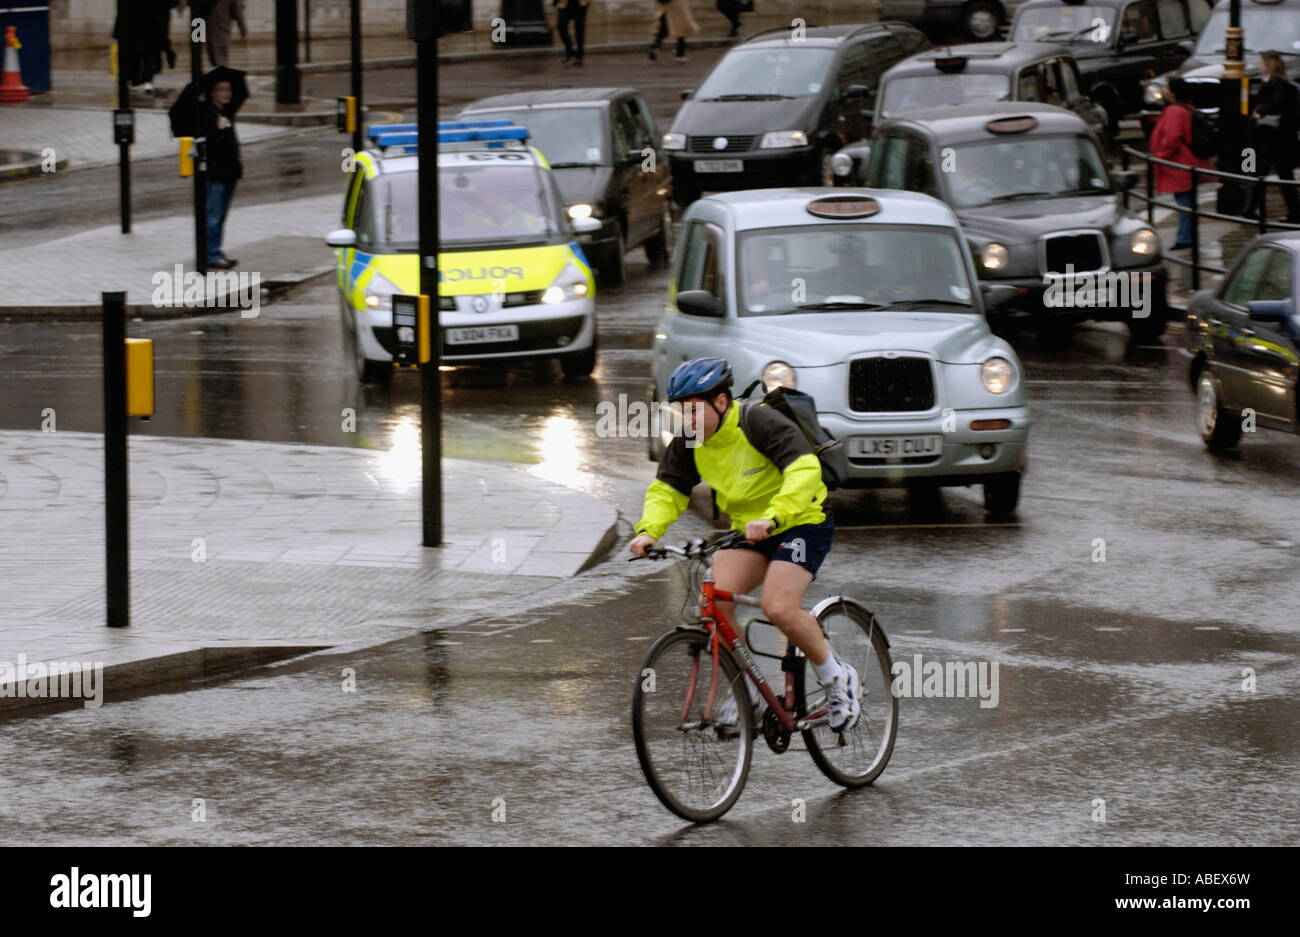 Commuter cyclist with black cab London taxis in rain Trafalgar Square, London, UK Stock Photo